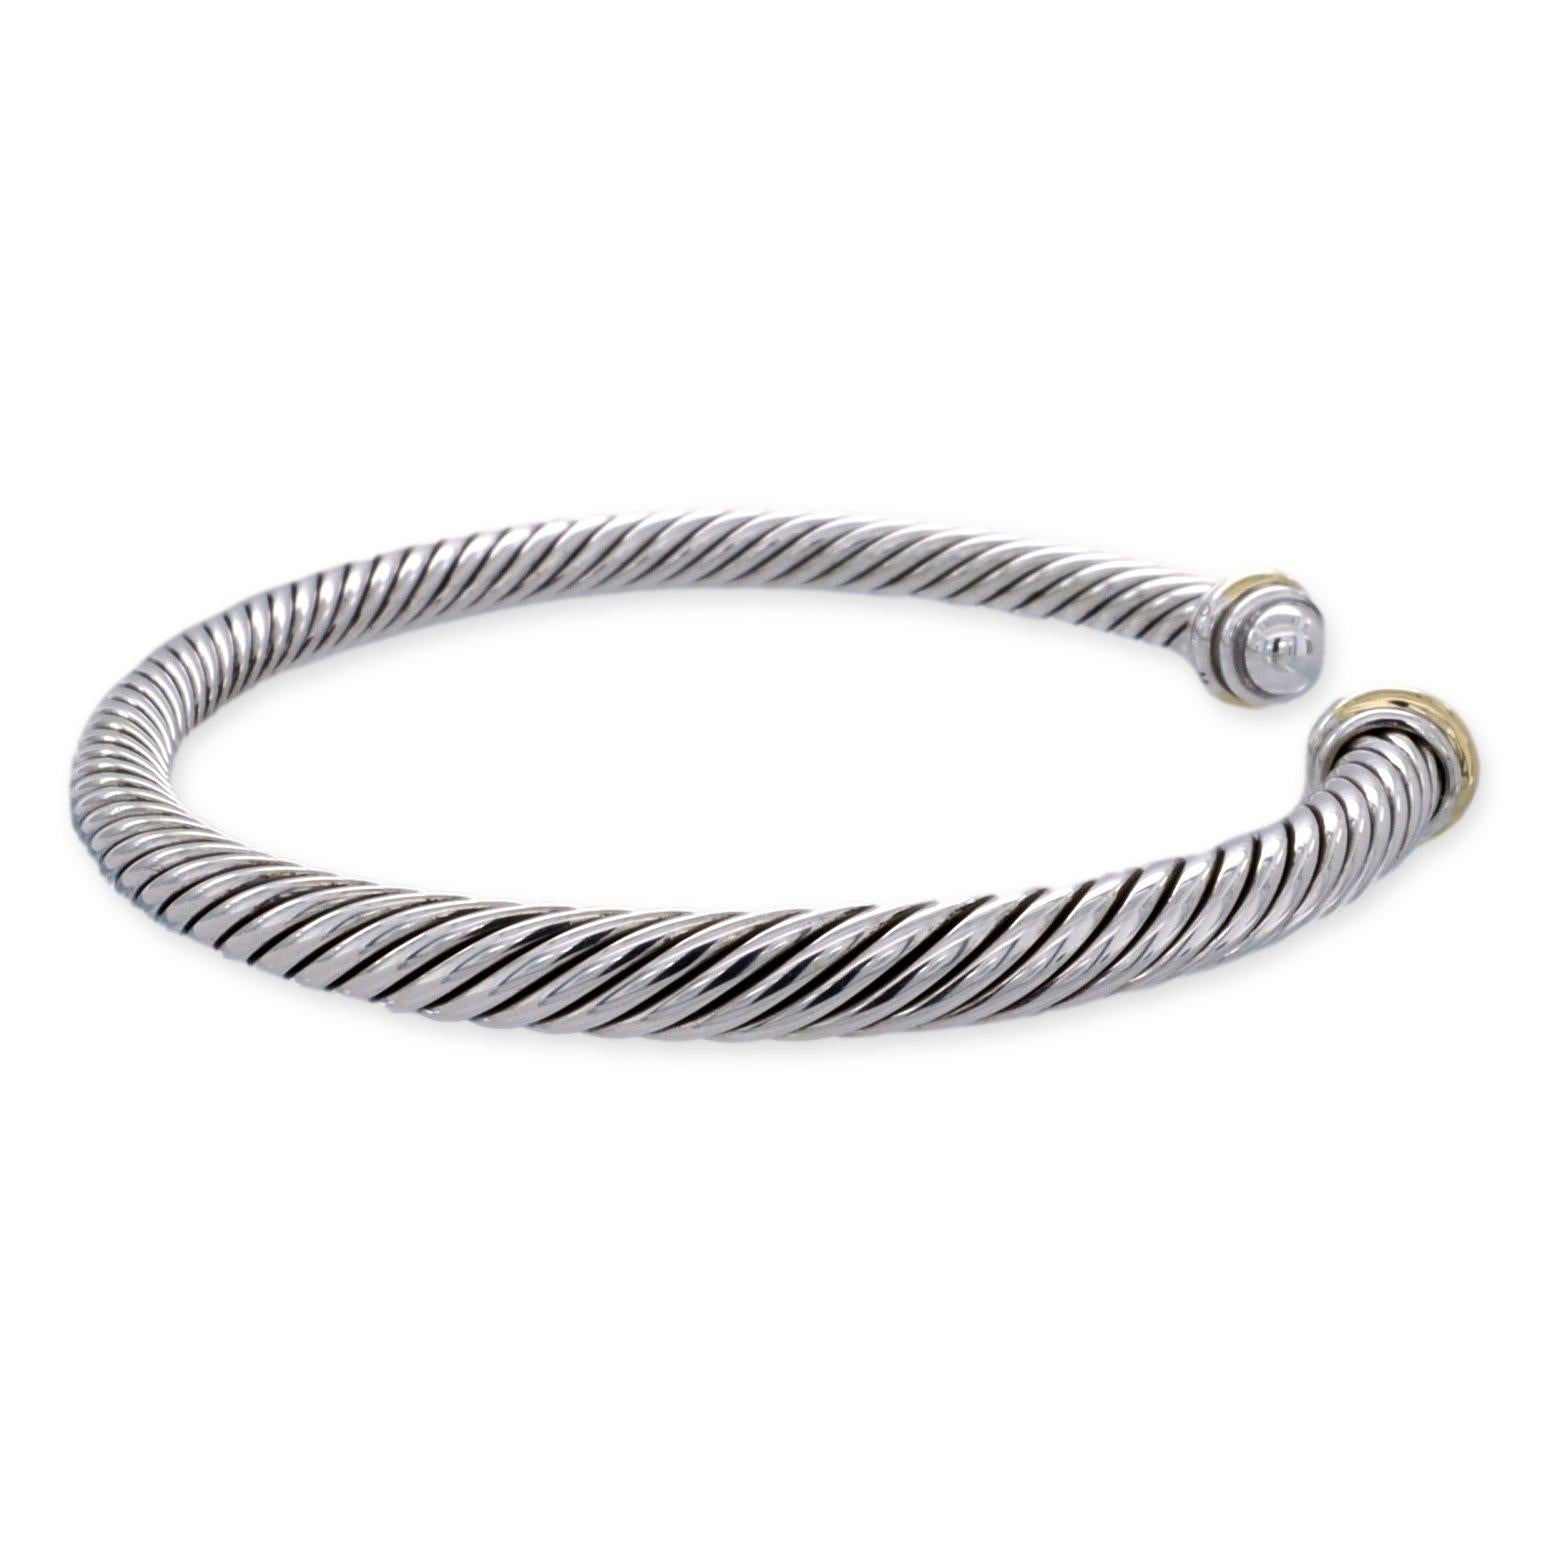 David Yurman open cuff bracelet from the Cable Classics collection finely crafted in sterling silver with two embellishments finished in 18 karat yellow gold. Bracelet measures 4mm and fits wrists up to 6